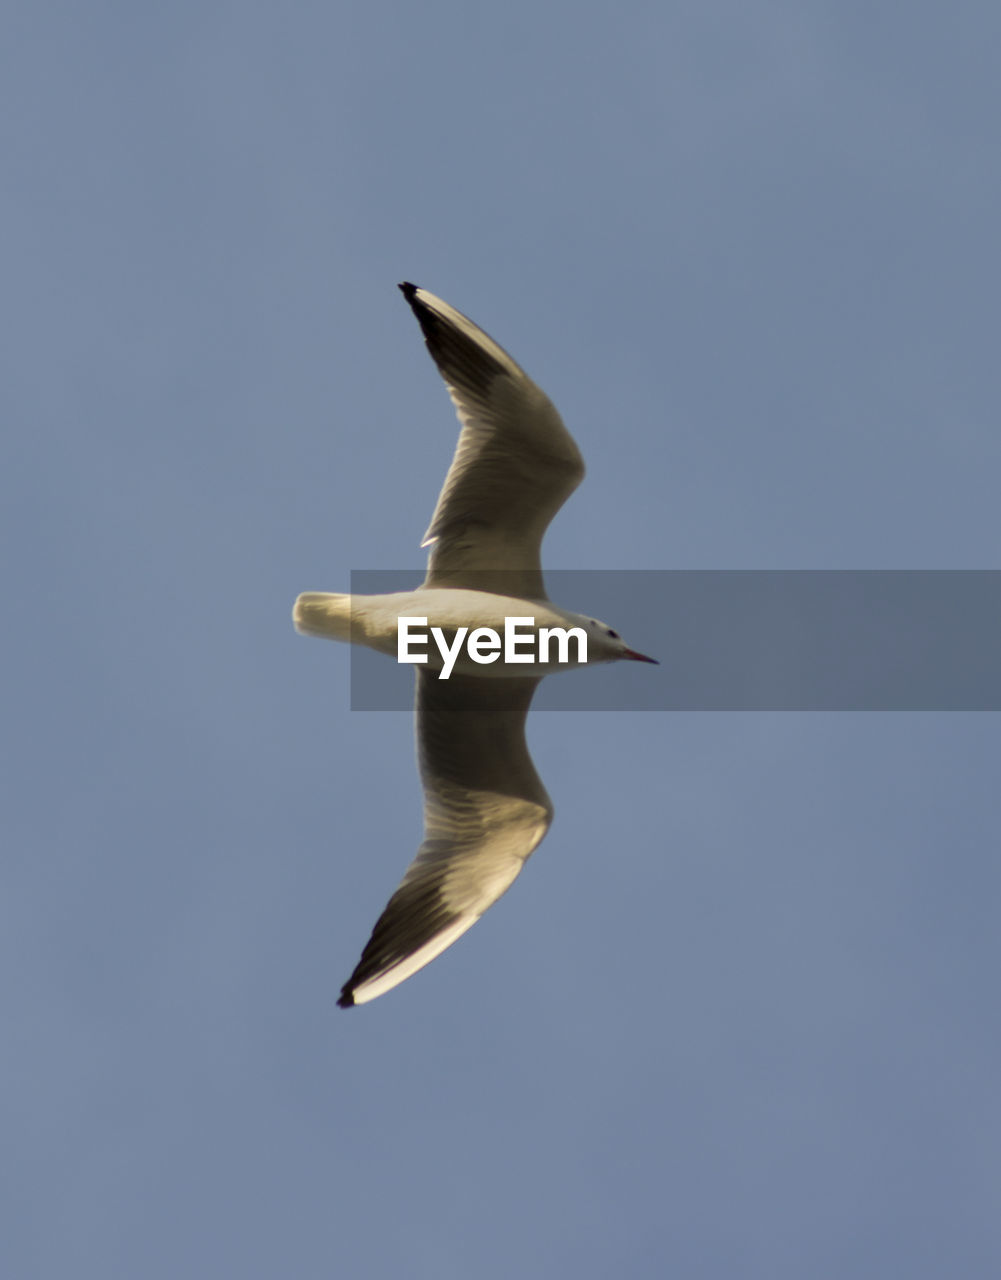 CLOSE-UP OF SEAGULL FLYING AGAINST CLEAR SKY